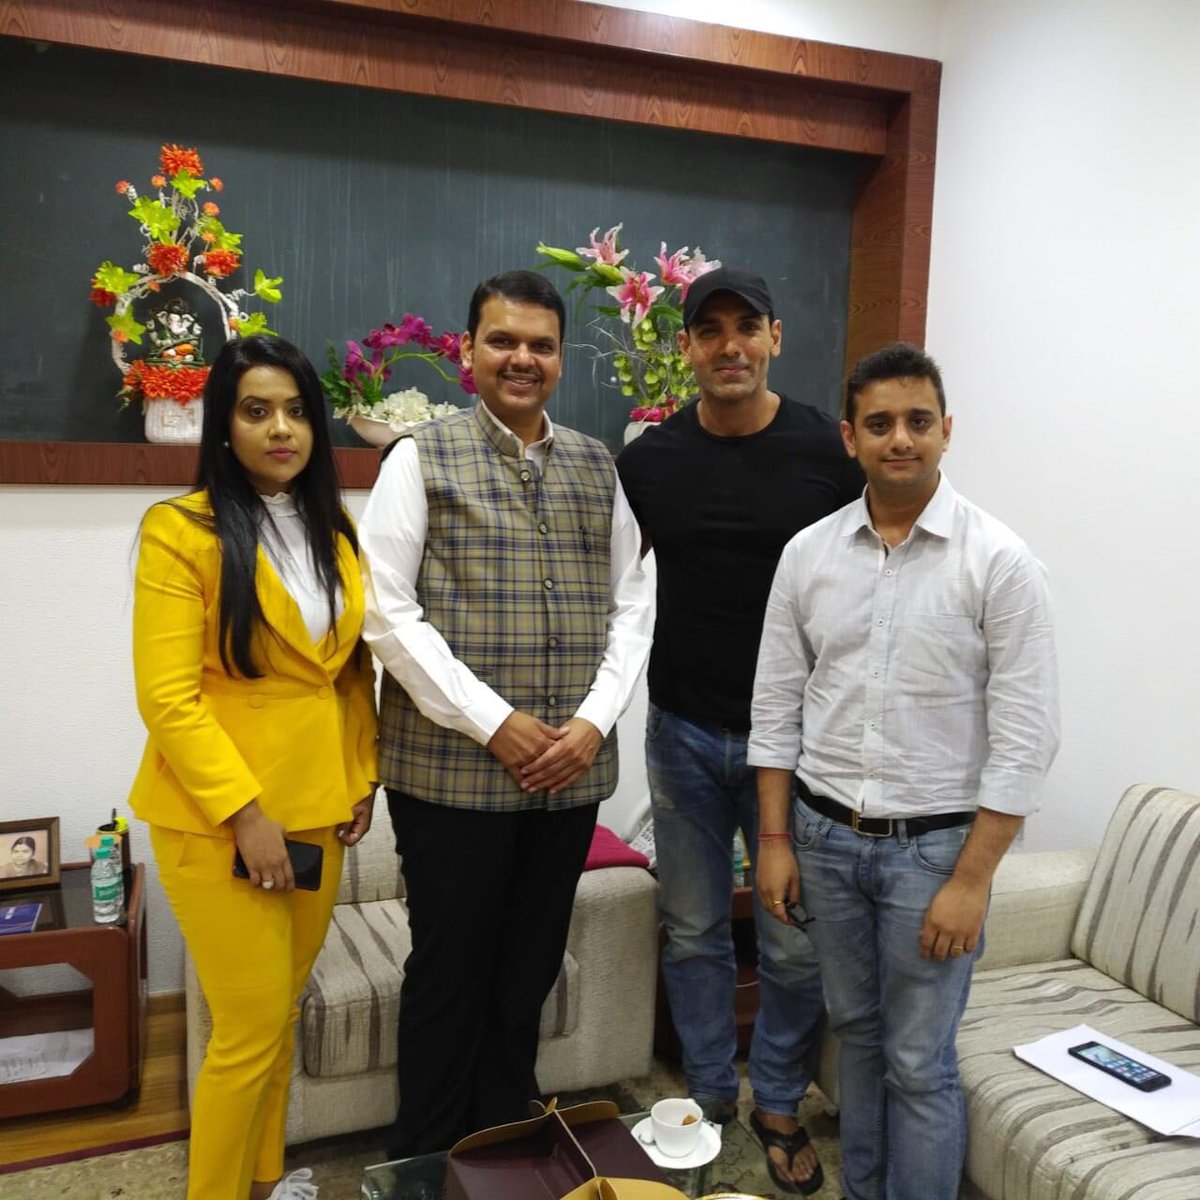 Absolute pleasure meeting the young and dynamic @Dev_Fadnavis. Amazing to know about the splendid work he is doing for Maharashtra. I am really honoured that he has heard good things about Parmanu. Would love to show him and his lovely wife @fadnavis_amruta the film soon.